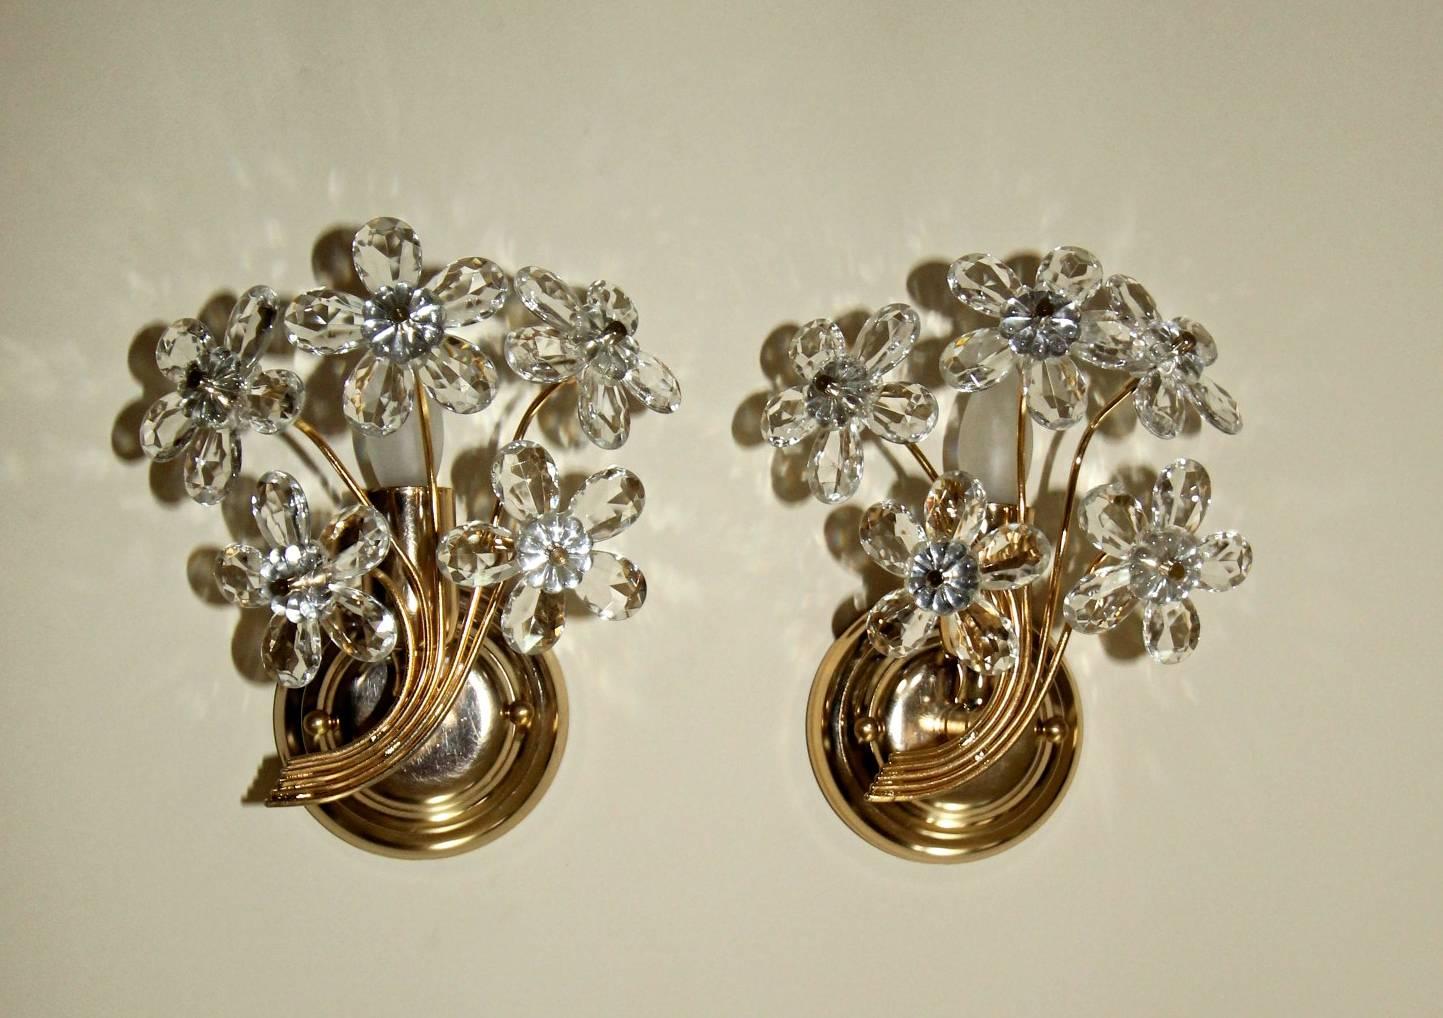 Pair of Italian Floral Crystal Wall Sconces 2